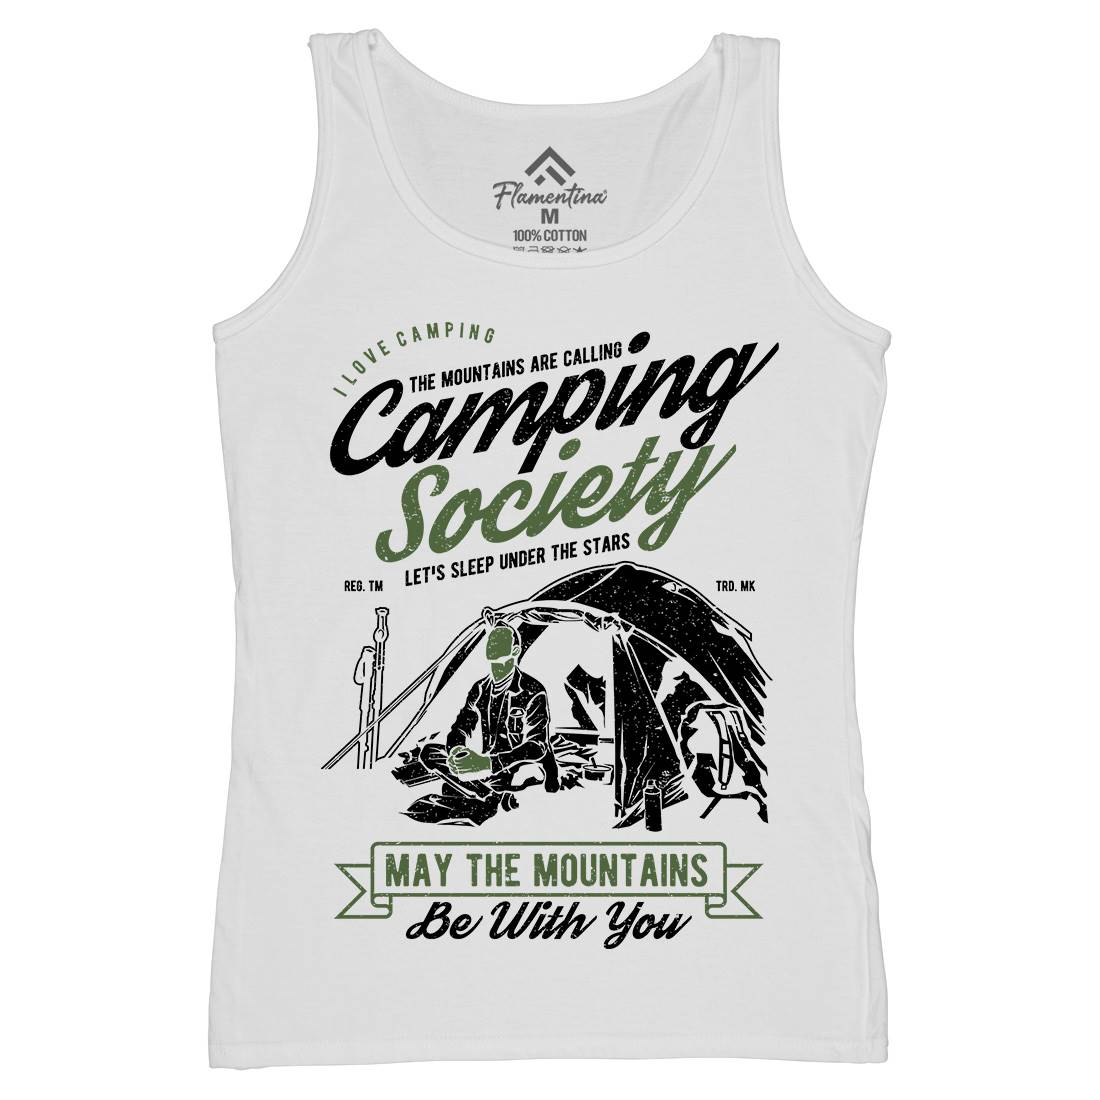 Camping Society Womens Organic Tank Top Vest Nature A631